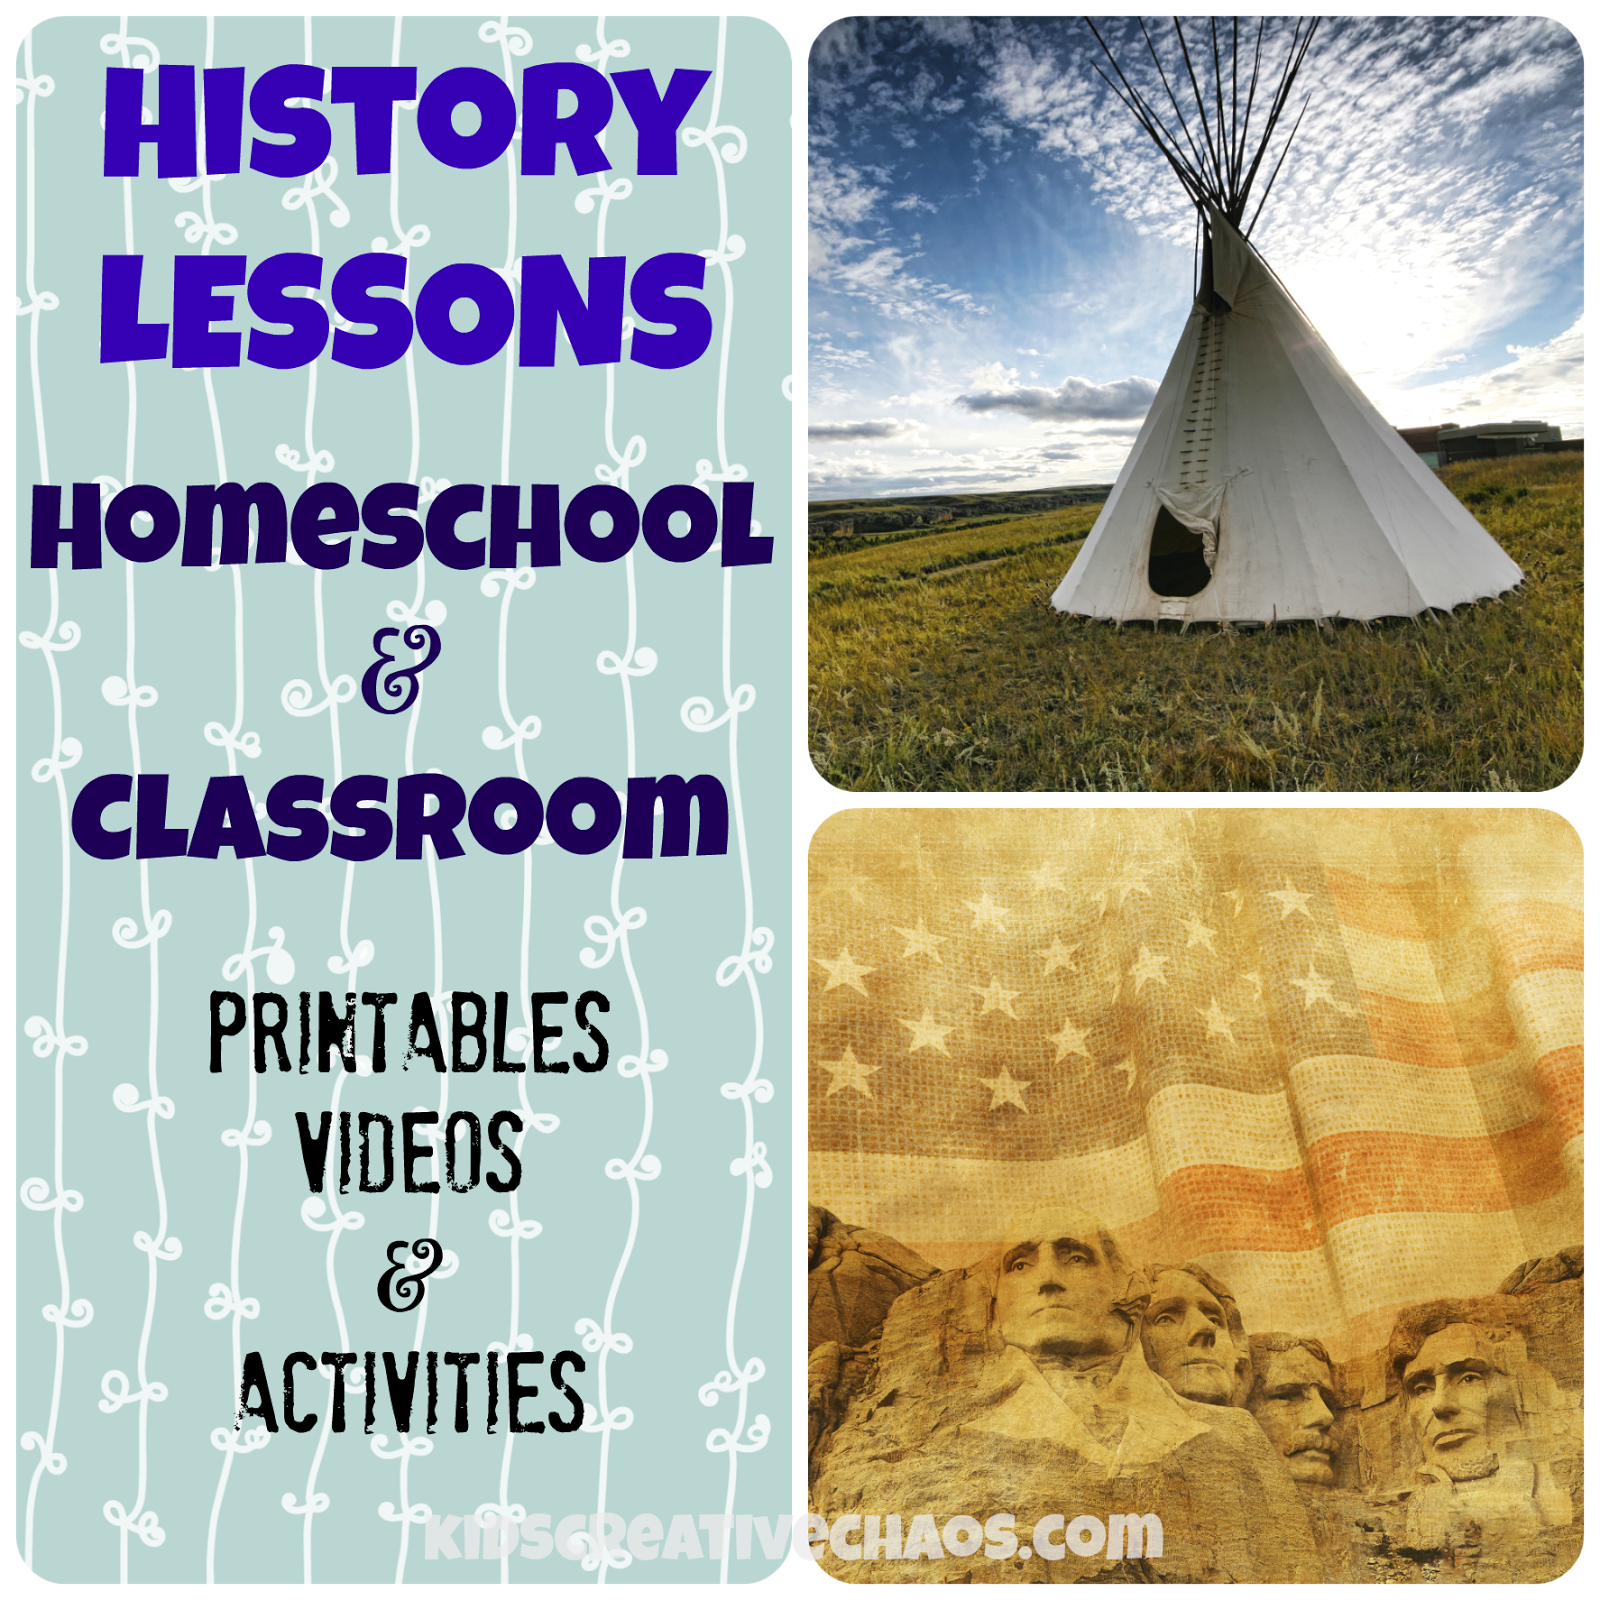 Online History Lessons: Curriculm, Printables, and Videos - Adventures